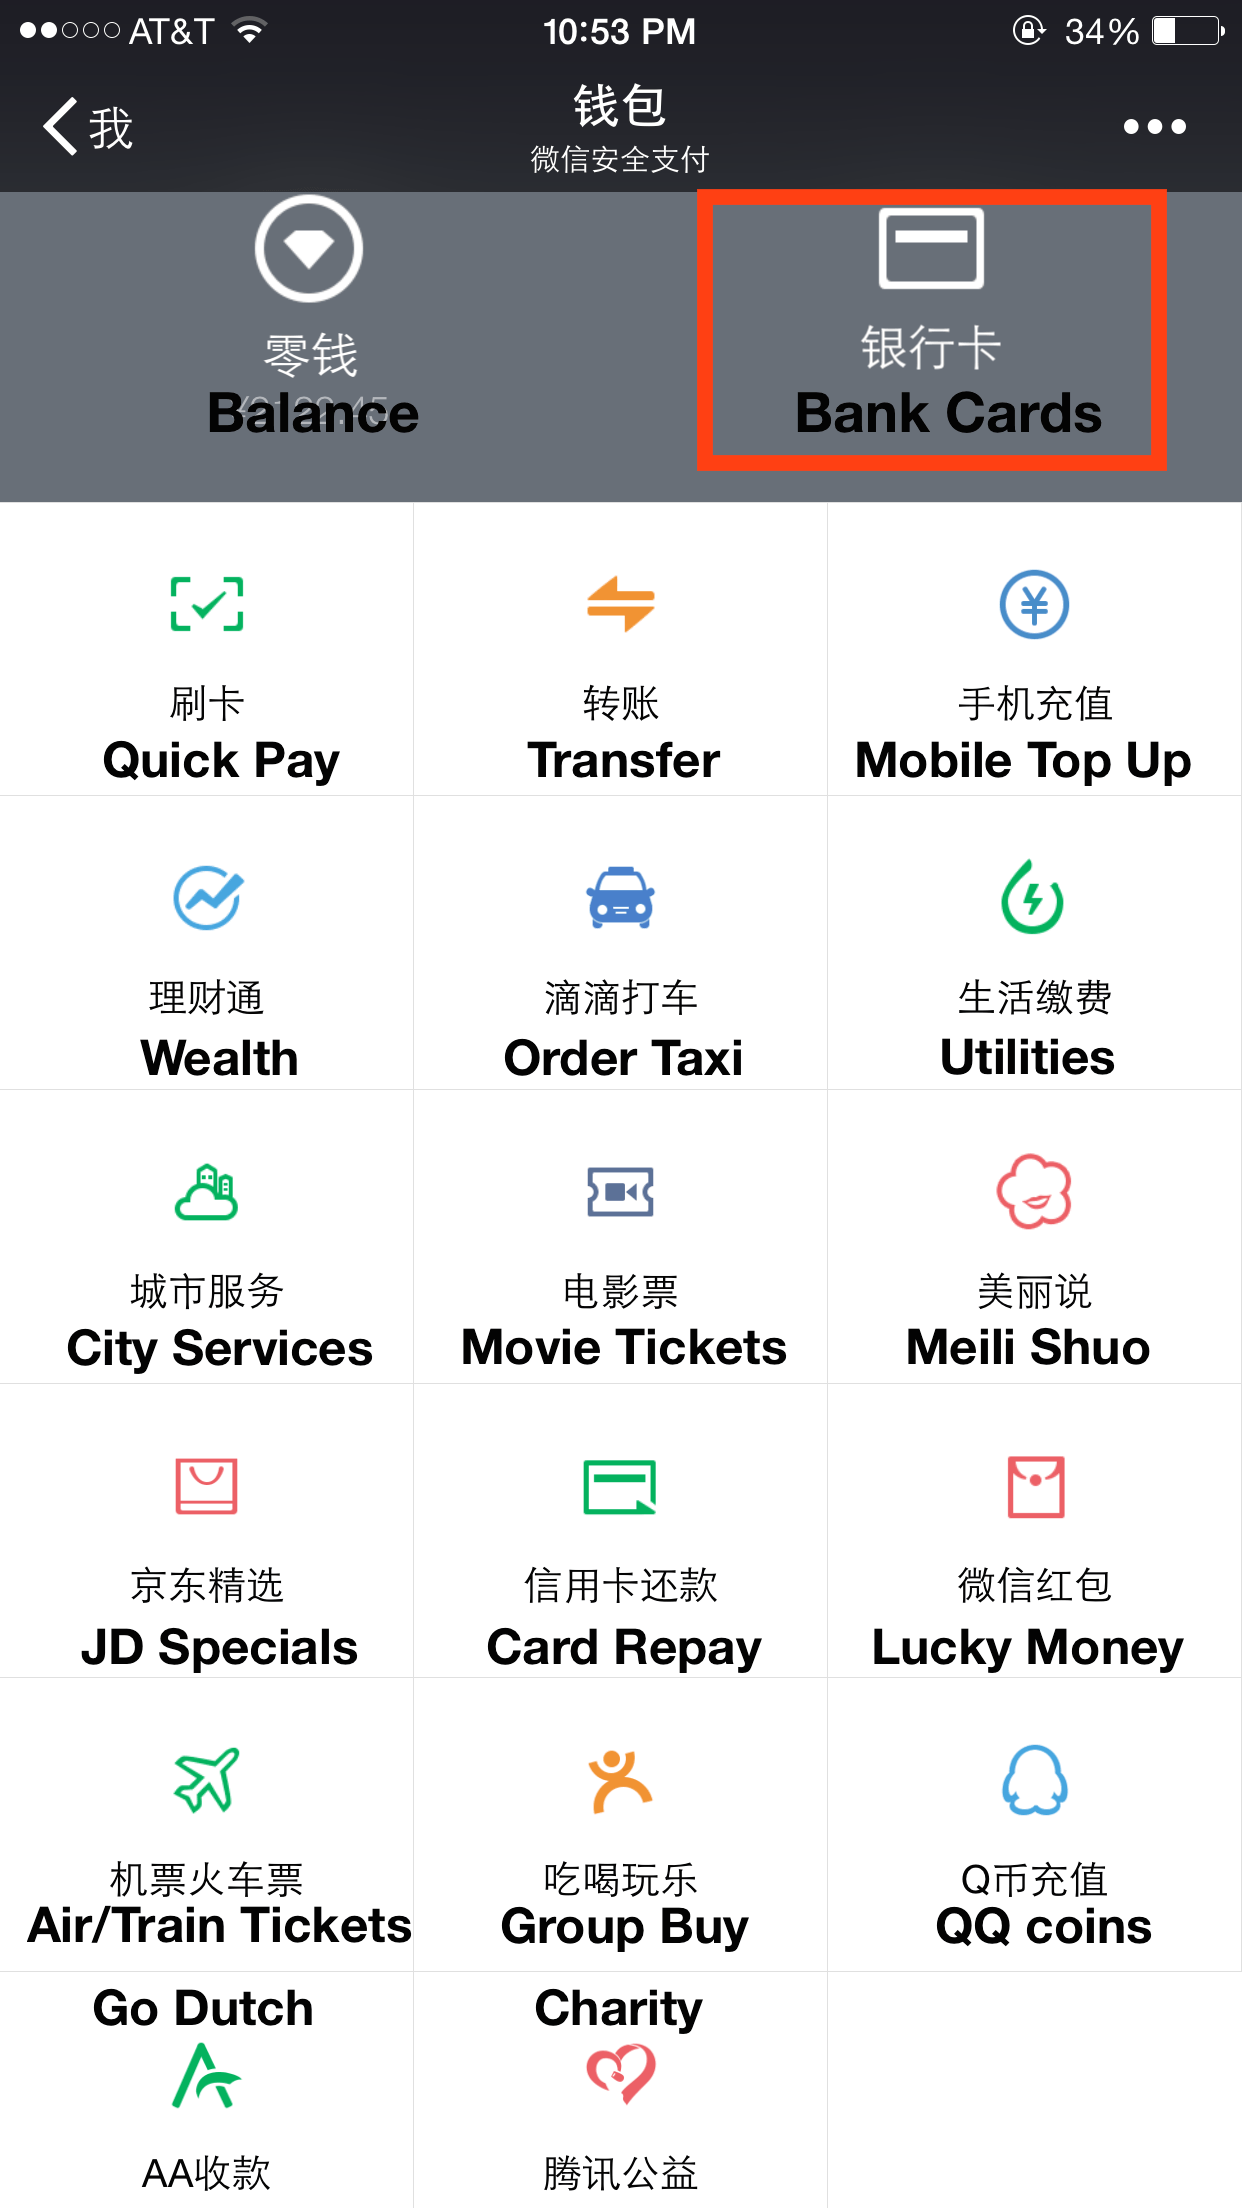 QQ Wallet Logo - When One App Rules Them All: The Case of WeChat and Mobile in China ...